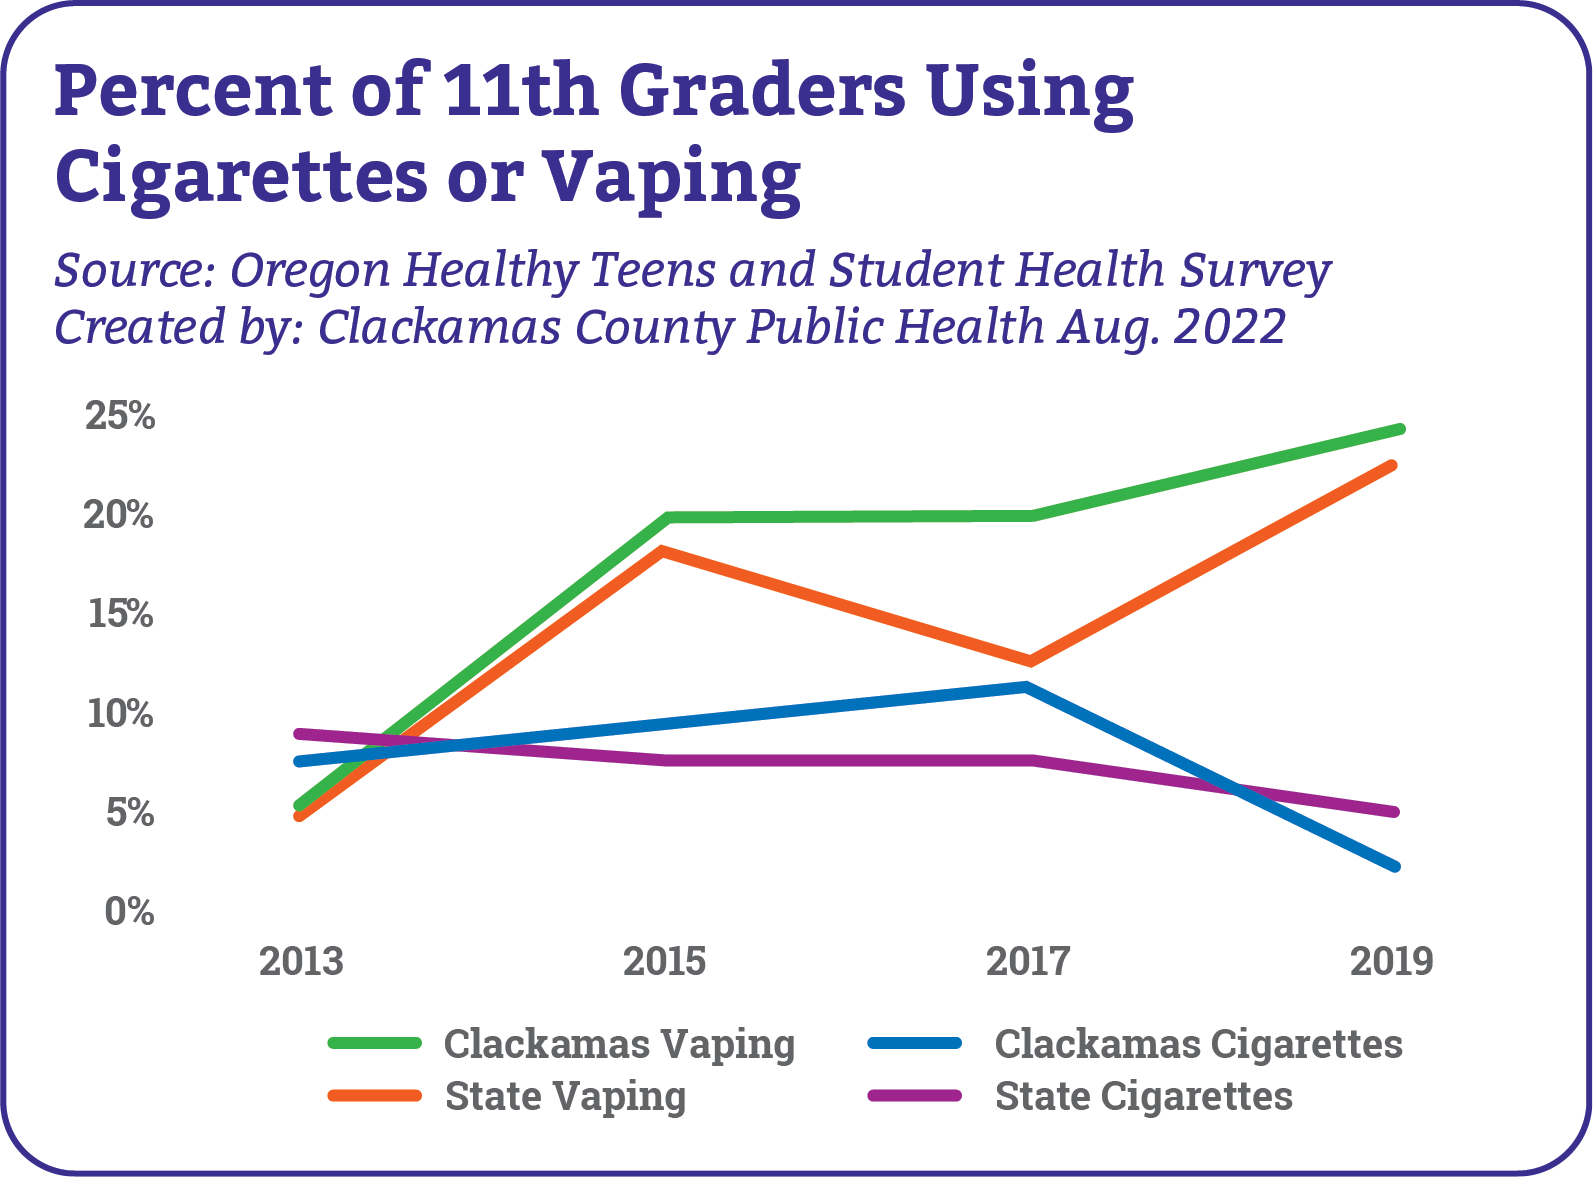 Percentage of flavored tobacco or vaping product use among current tobacco users by selected age groups (Oregon, 2019) 11th graders at 75.1 percent, young adults (18-24) at 64.6 percent, older adults (25+) at 25.5 percent